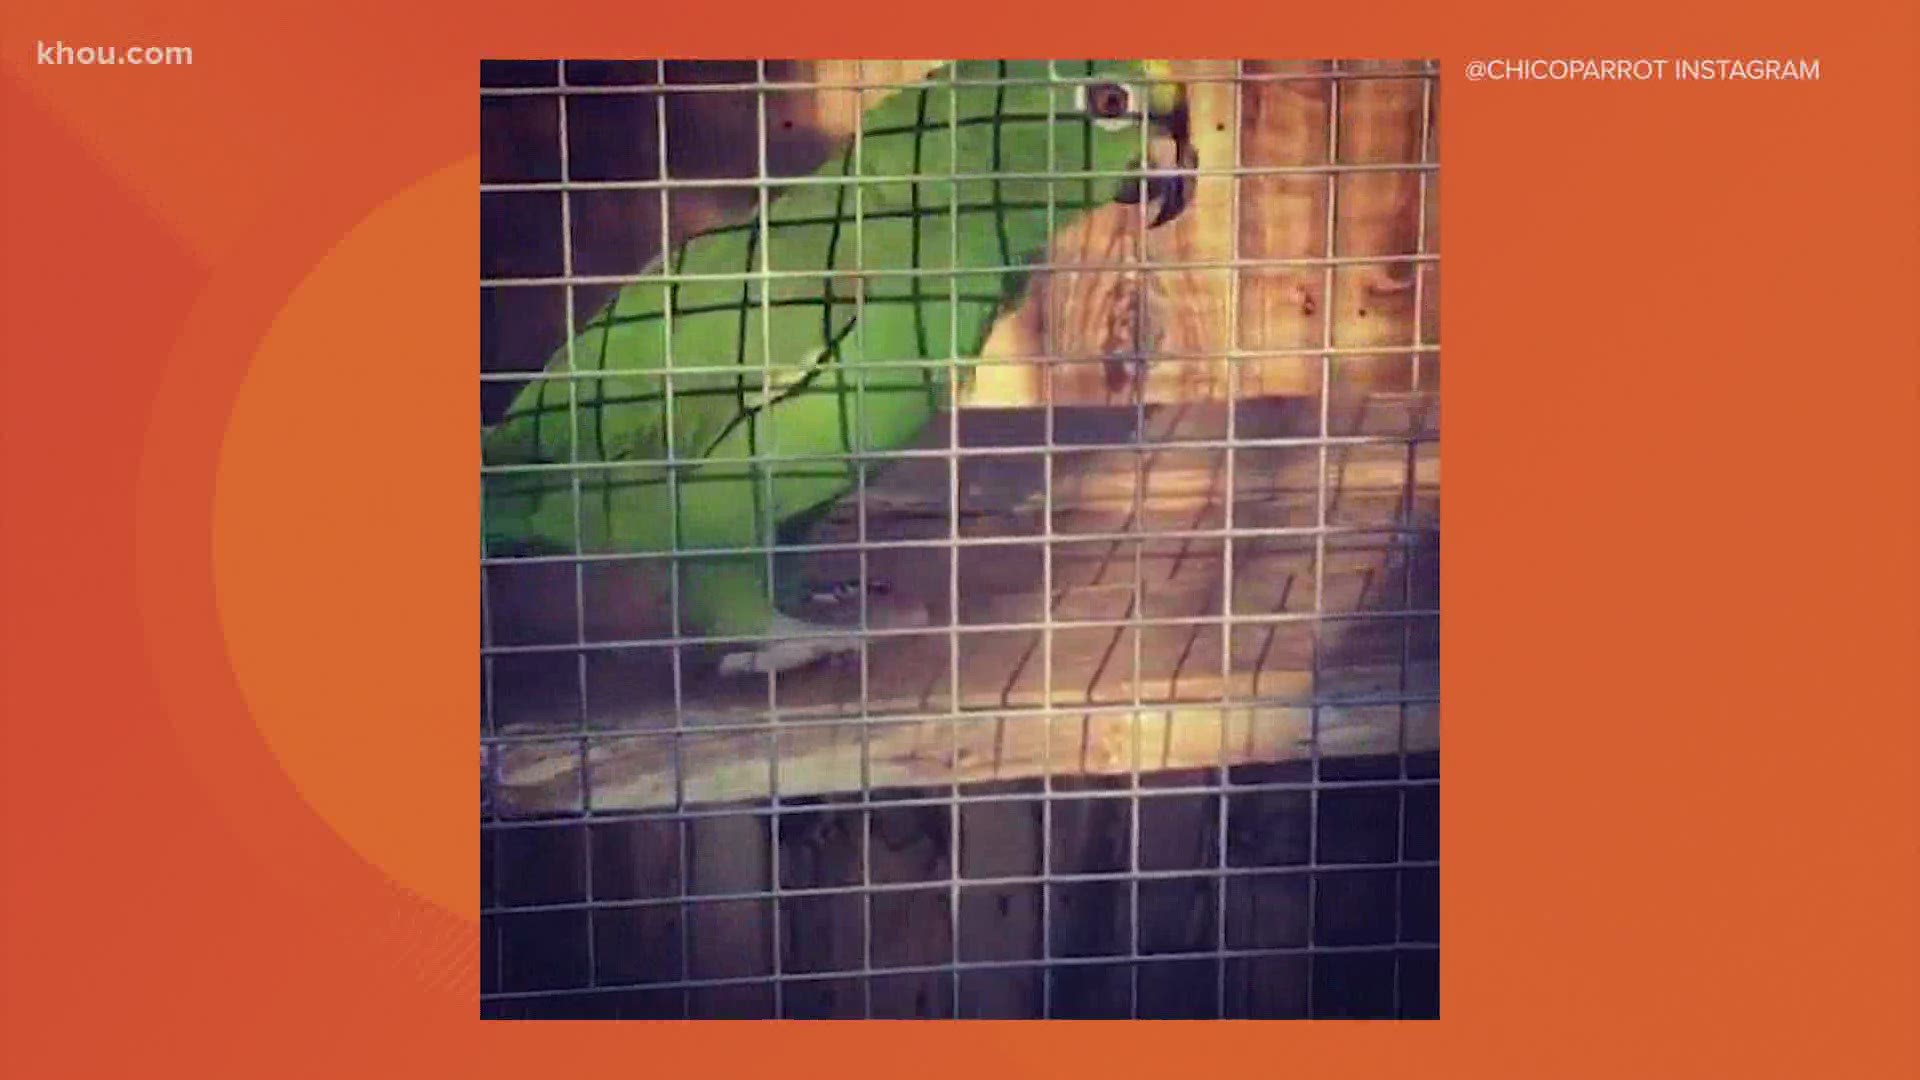 parrot singing beyonce if i were a boy